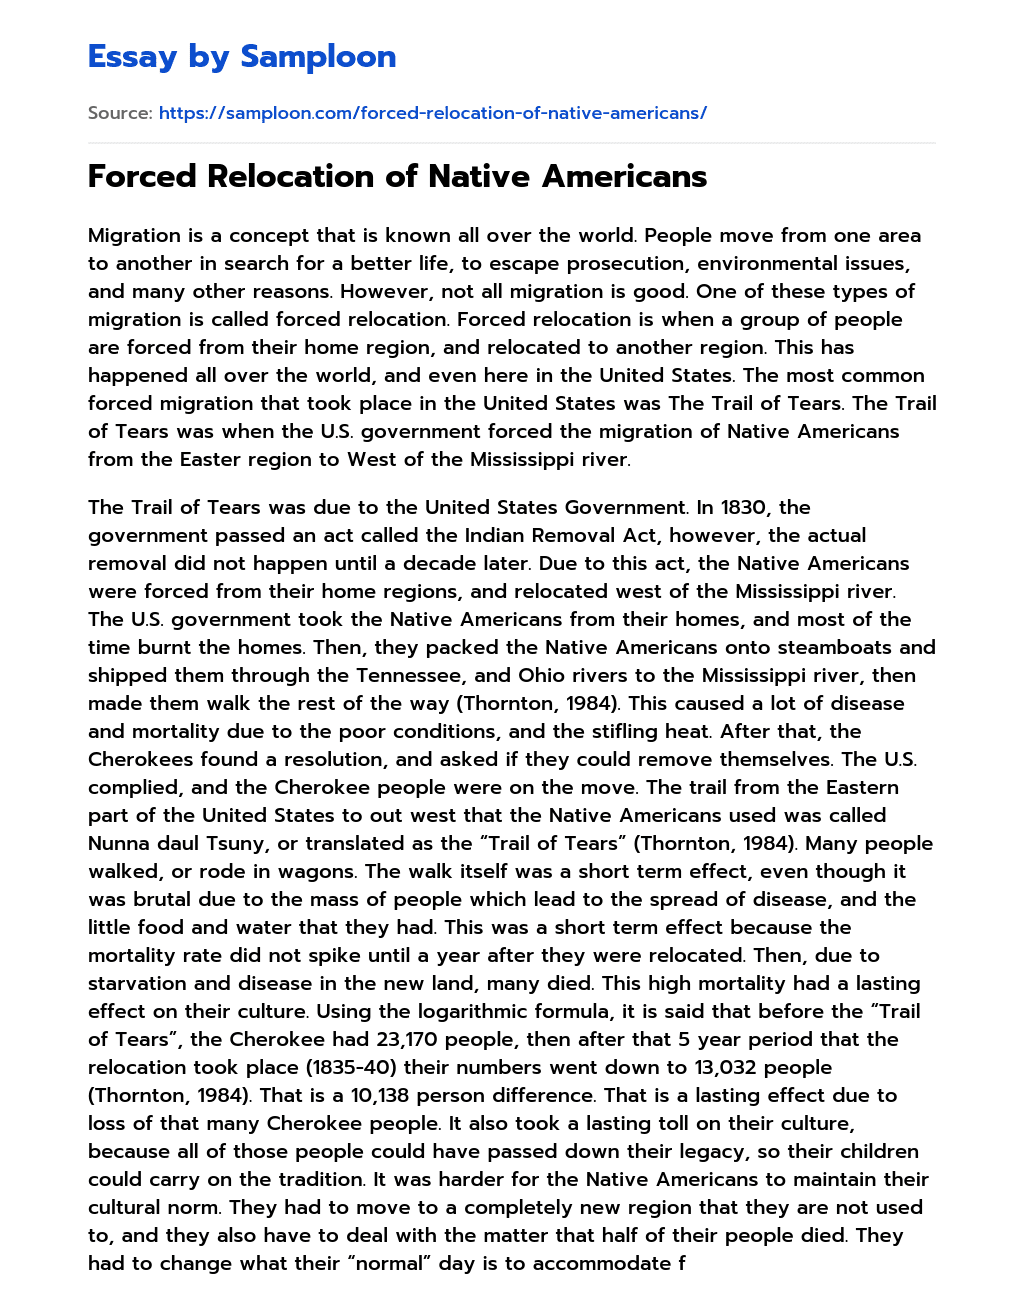 Forced Relocation of Native Americans essay